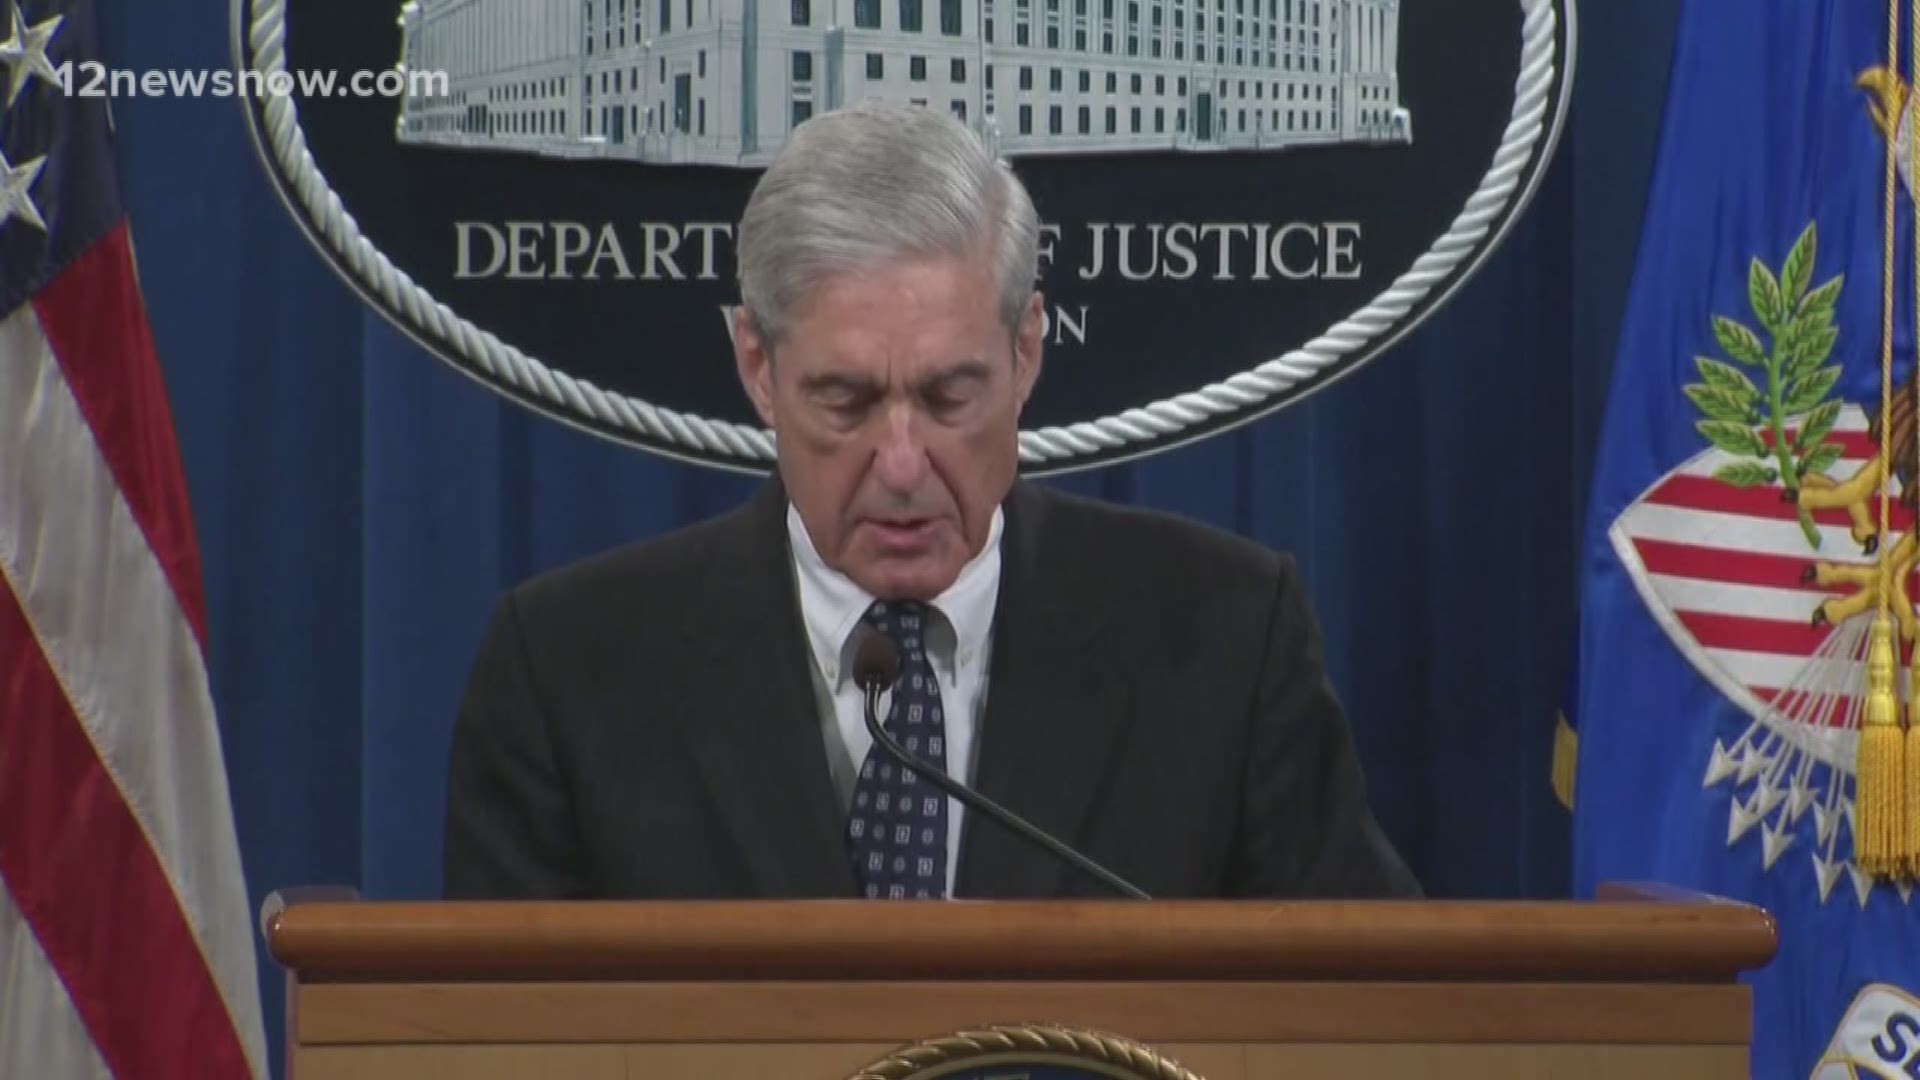 Mueller said that words were chosen very carefully very carefully when compiling the report of Russian meddling in the election and possible obstruction by President Trump.